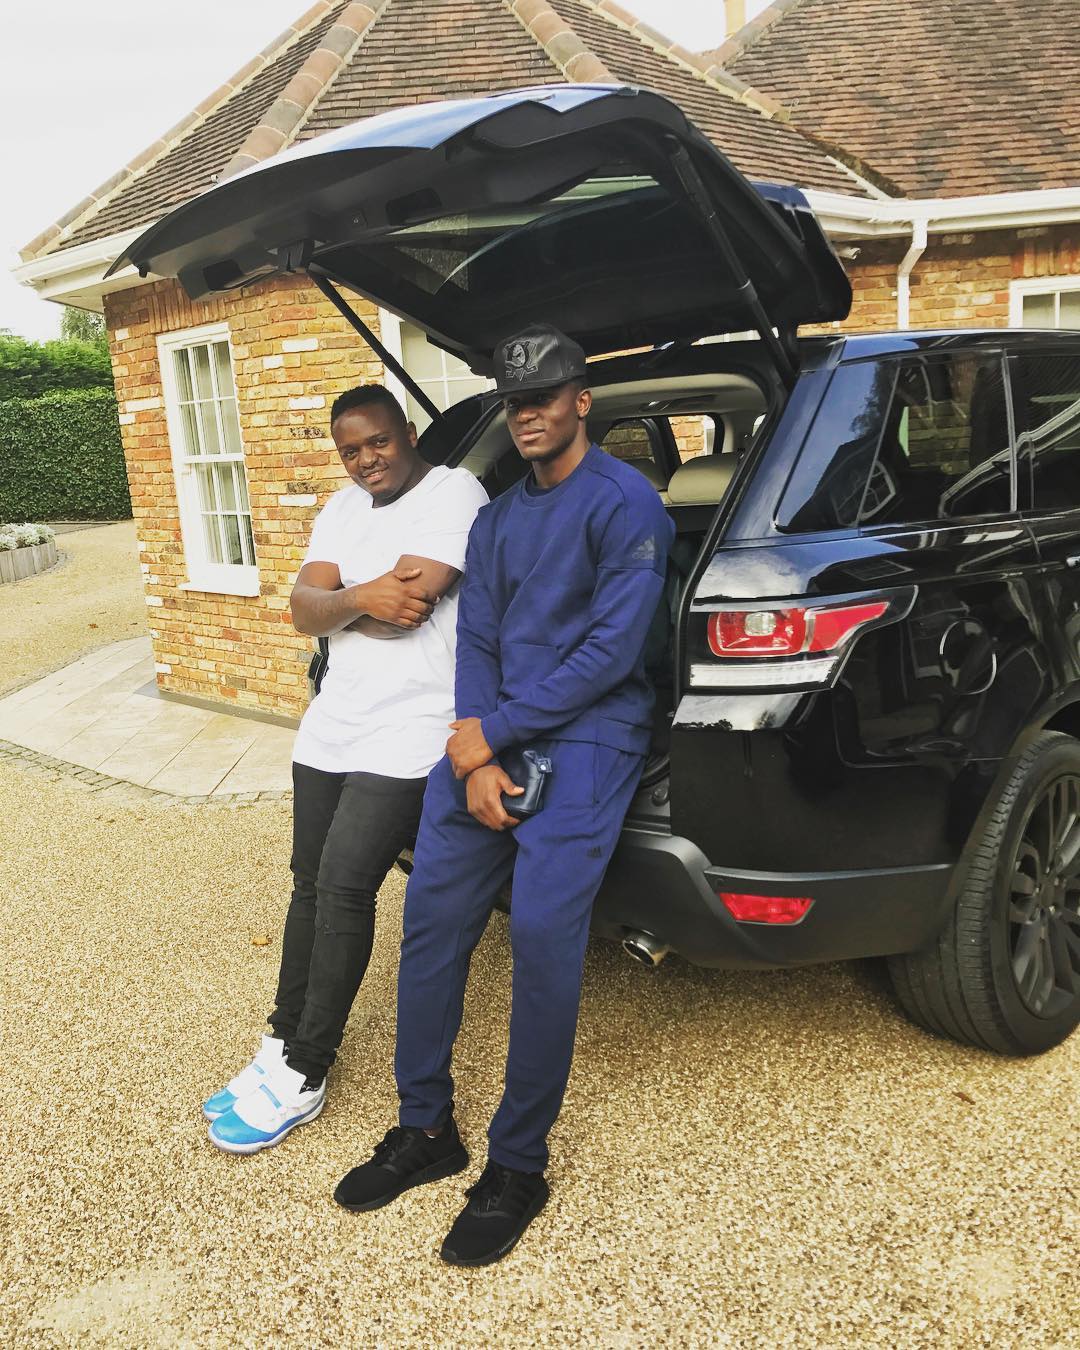 2018-07-26-Victor Wanyama And McDonald Mariga: Chilling On The Rear End Of Their Range Rover Car